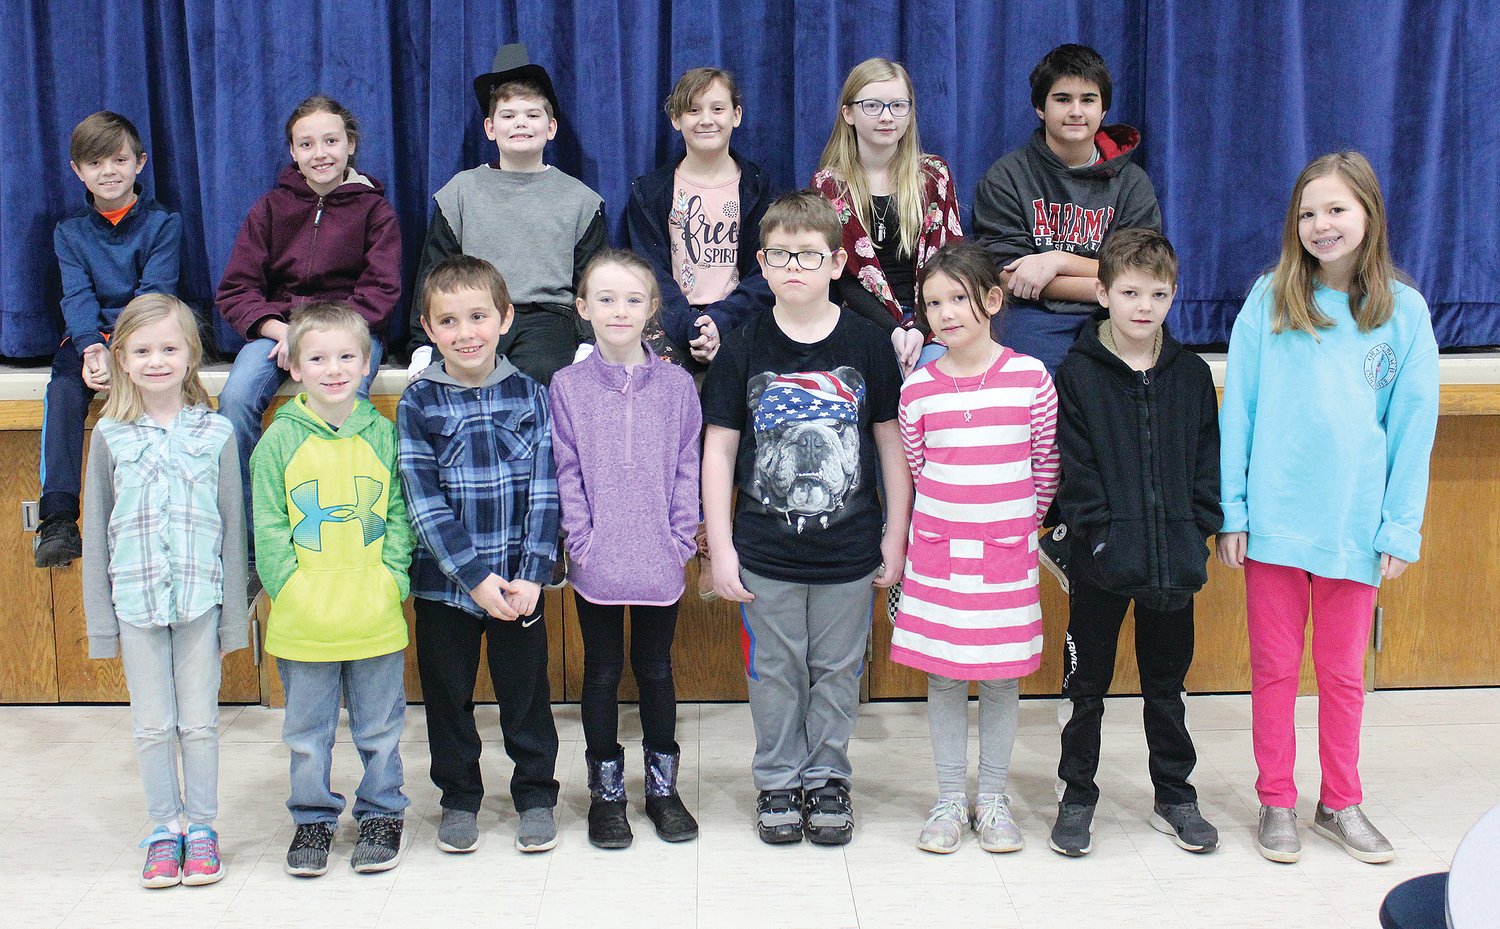 Southeast Fountain Elementary School Students of the Month for February are, from left, front row, Lilly Mullinex, Rocktyn Knutti, Wesley Aldridge, Autumn Hughes, Brody Garland, Faith Mink, Austin Vincent and Kenli Walton; and back row, Beau Bowling, Kendra Niccum, Cash Chowning, Lilly Peterson, Olivia Dodd and Brandon Terry.